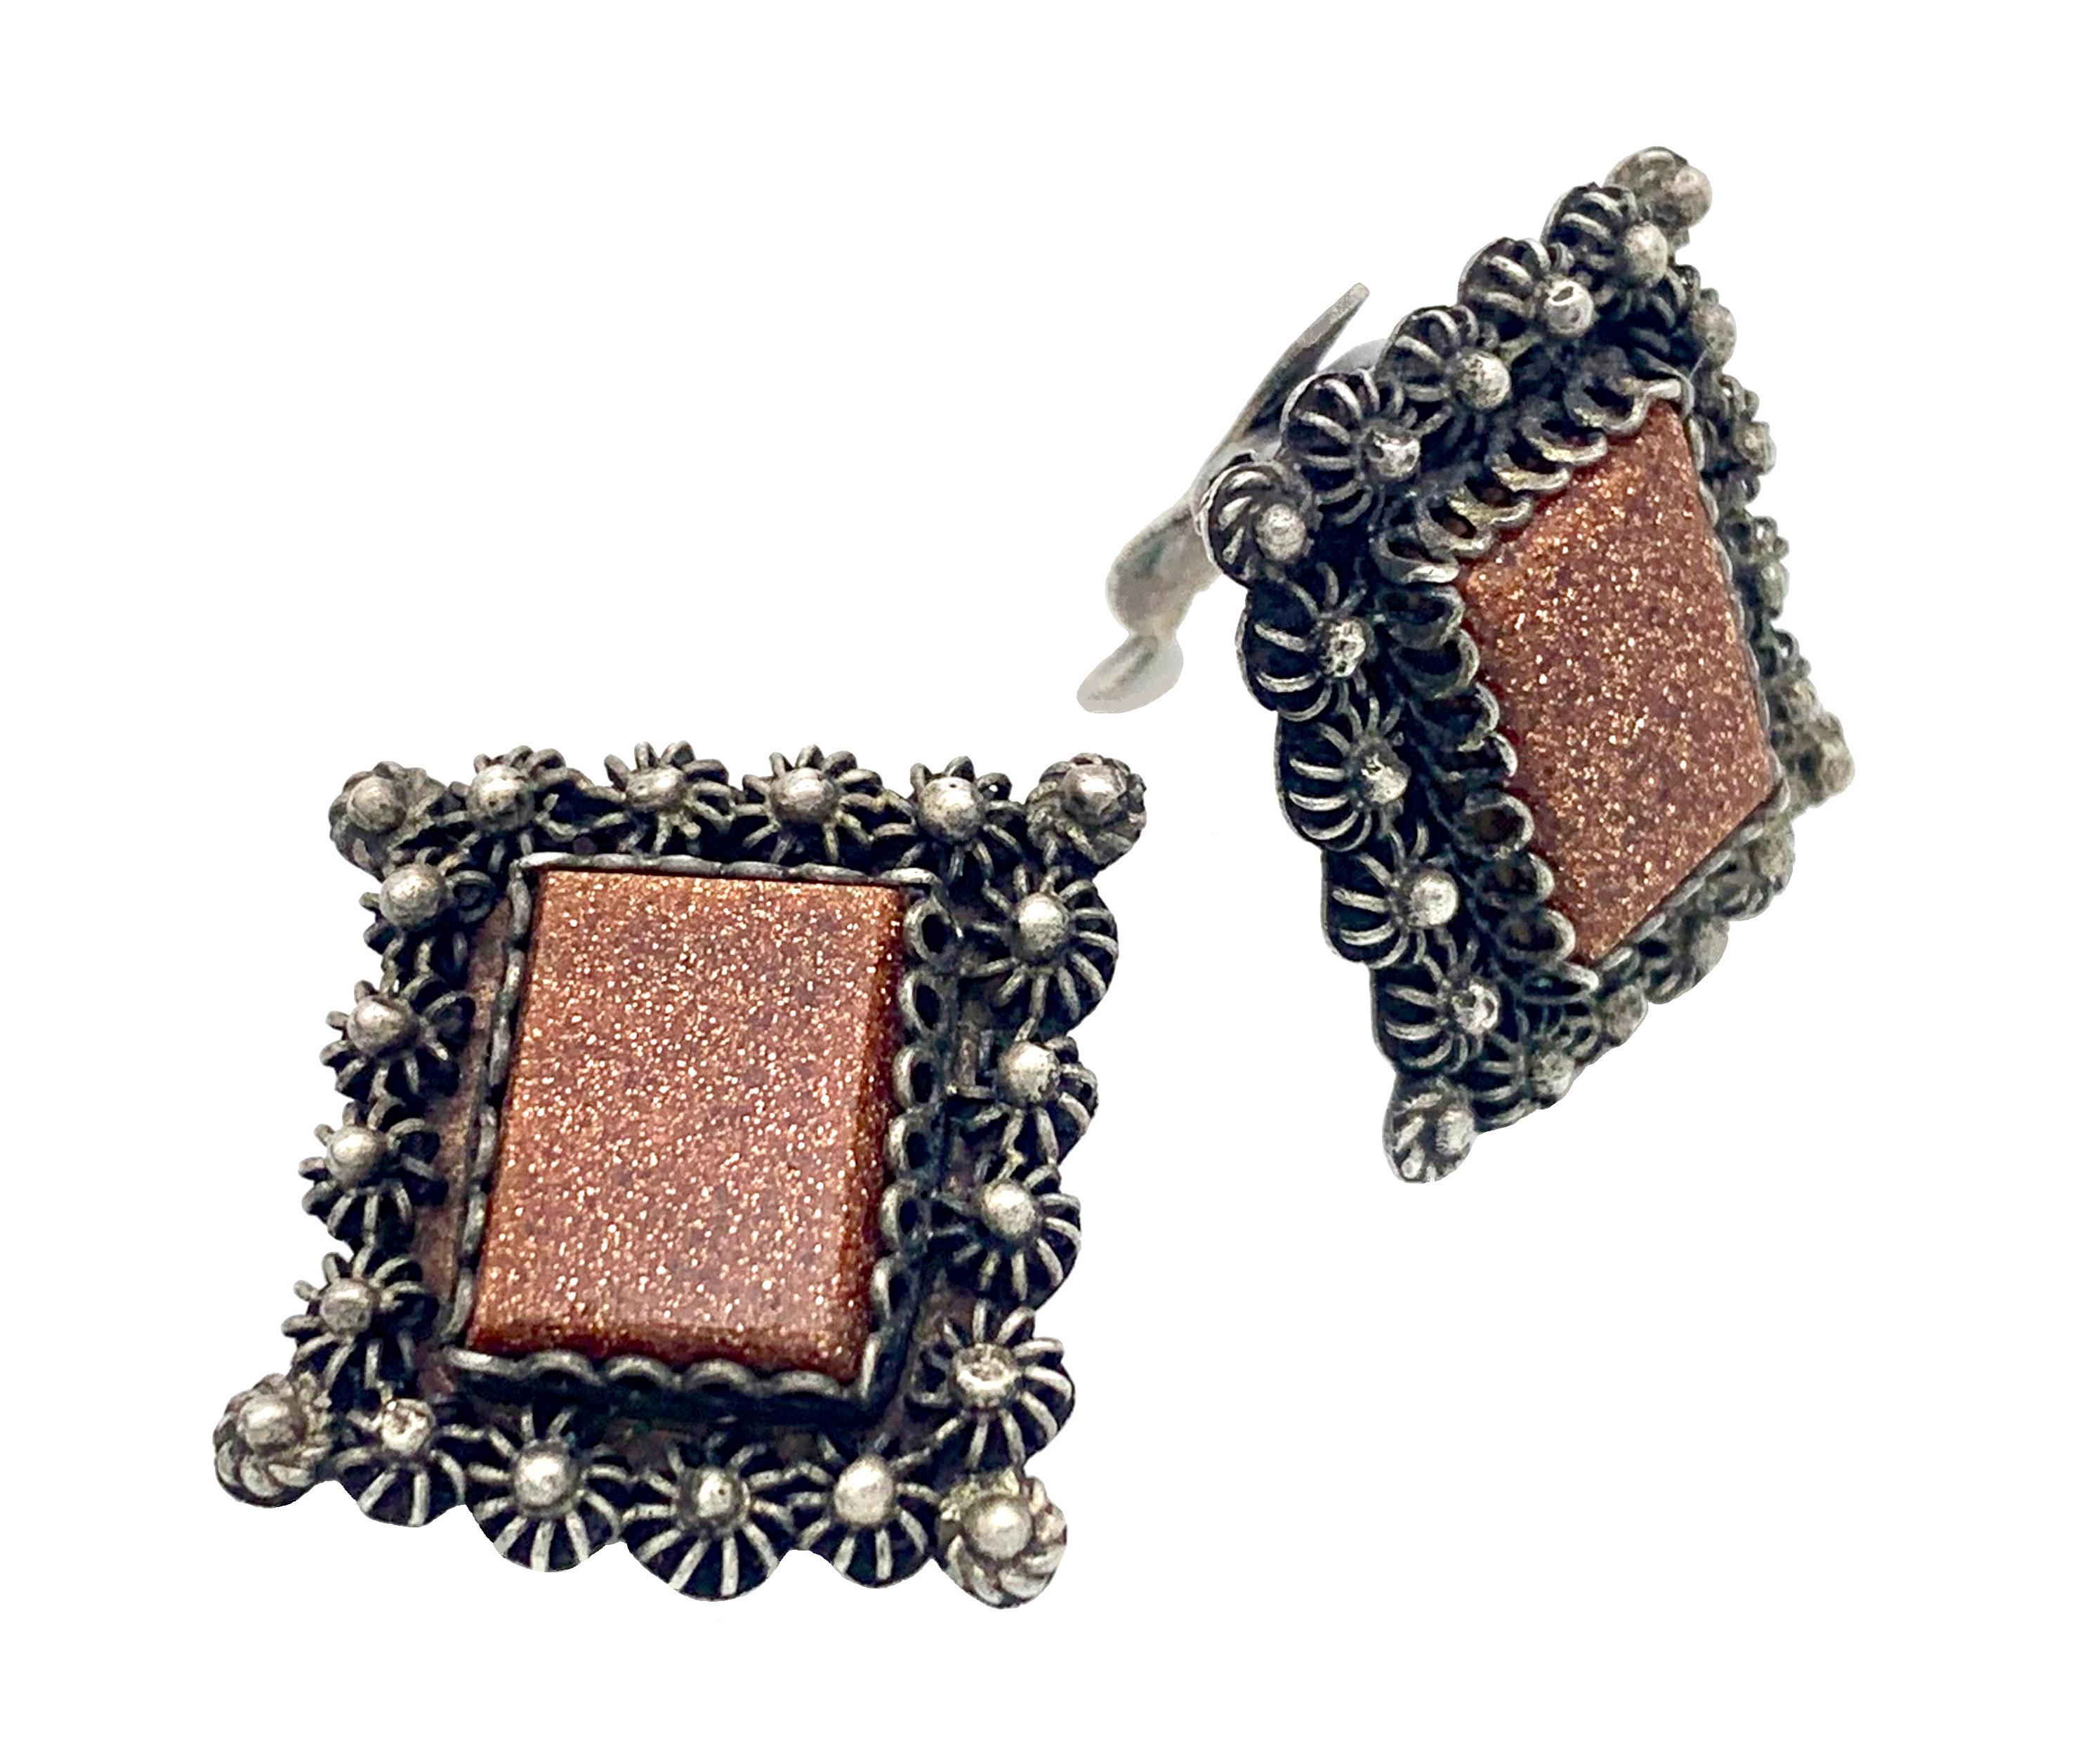 The clip on earrings were handcrafted out of silver in the mid-20th century. 
The rectangular aventurine glass plaques are framed by raised elements made out of silver wire and granulation. The earrings bear silver marks.